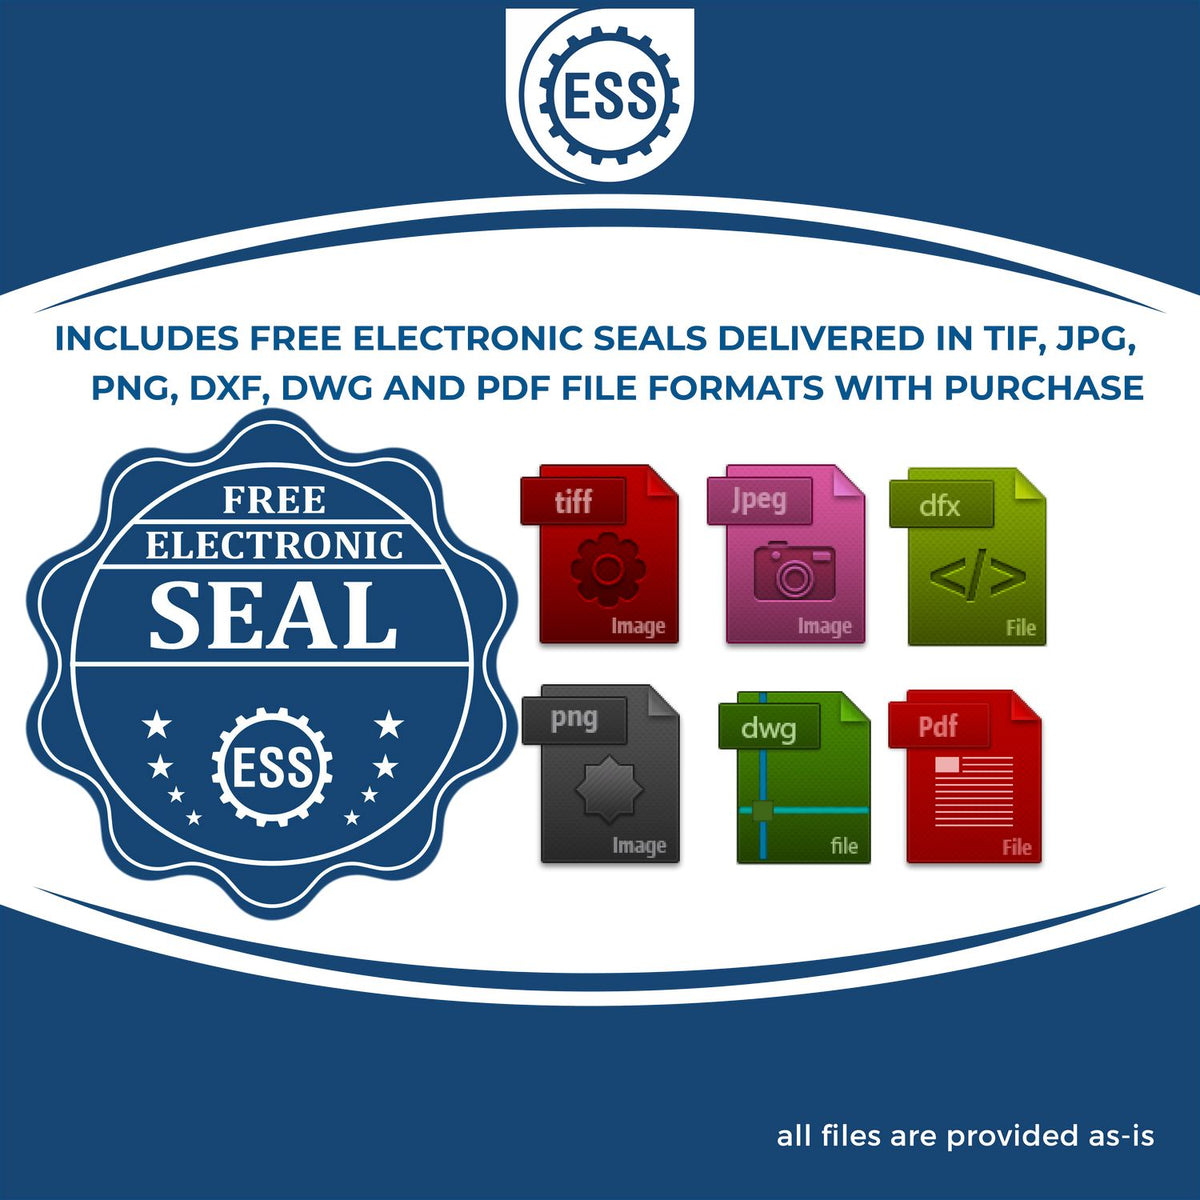 An infographic for the free electronic seal for the Slim Pre-Inked State Seal Notary Stamp for Massachusetts illustrating the different file type icons such as DXF, DWG, TIF, JPG and PNG.